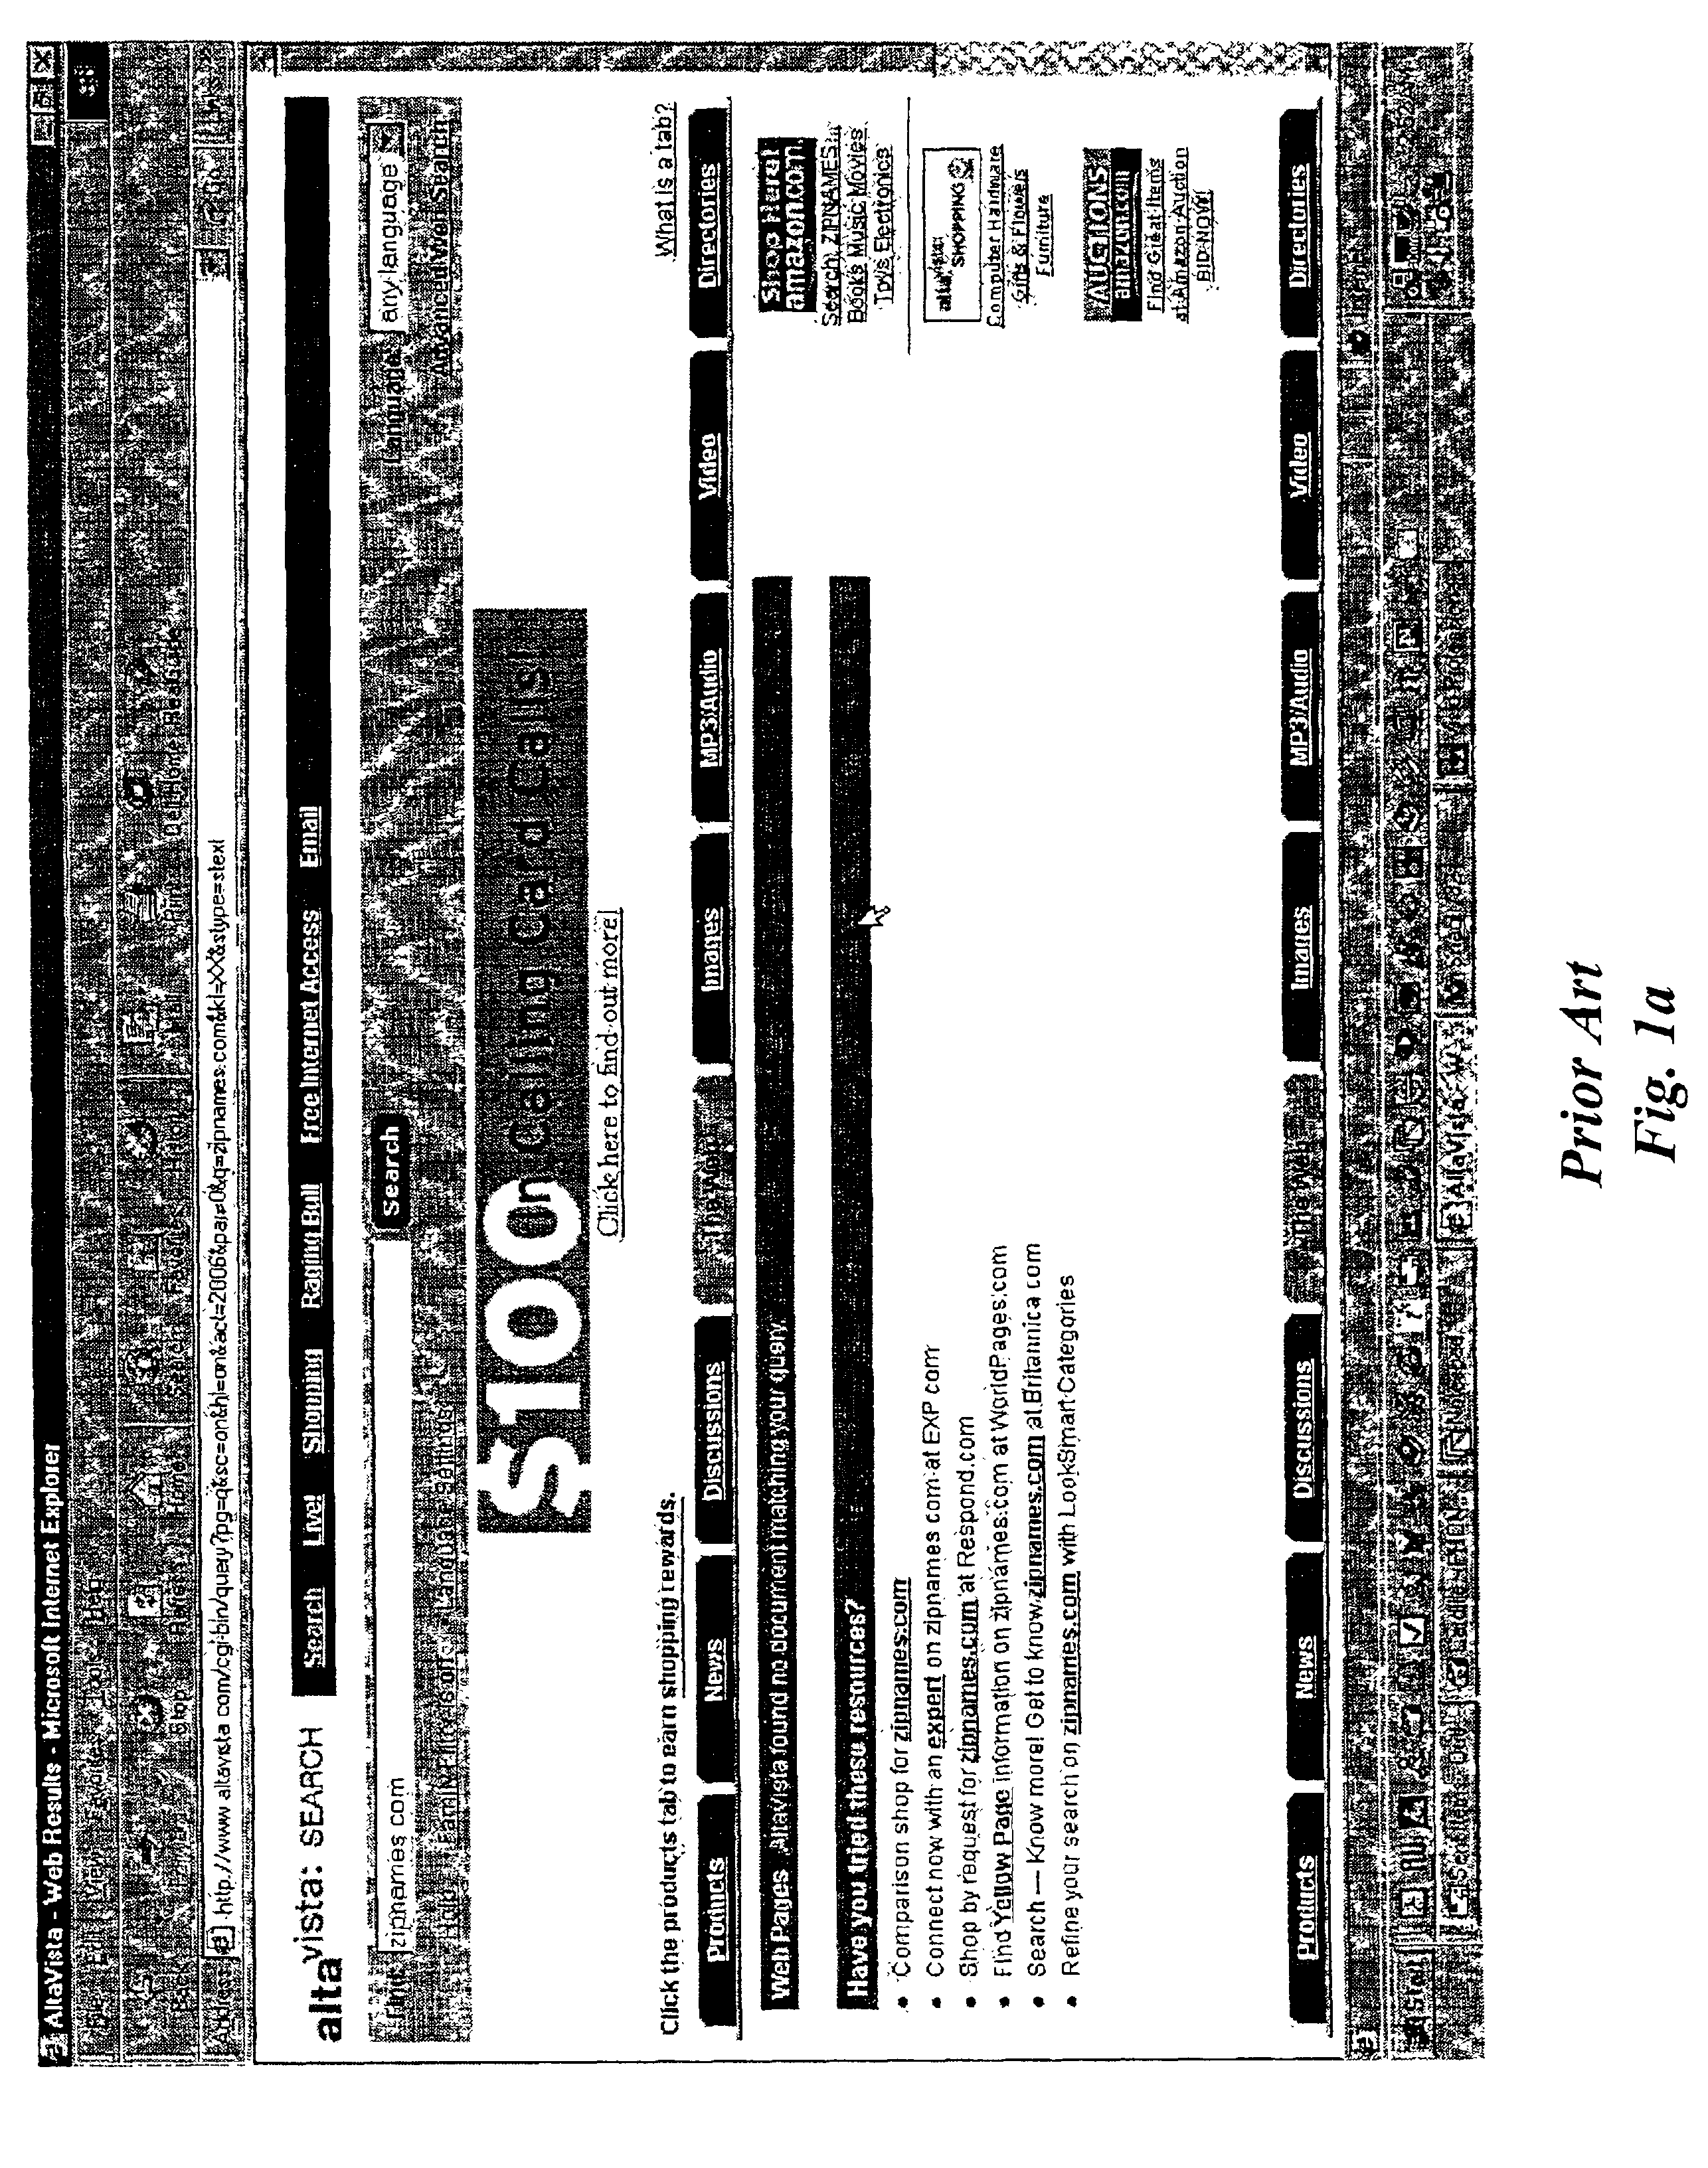 Method and apparatus for integrating resolution services, registration services, and search services